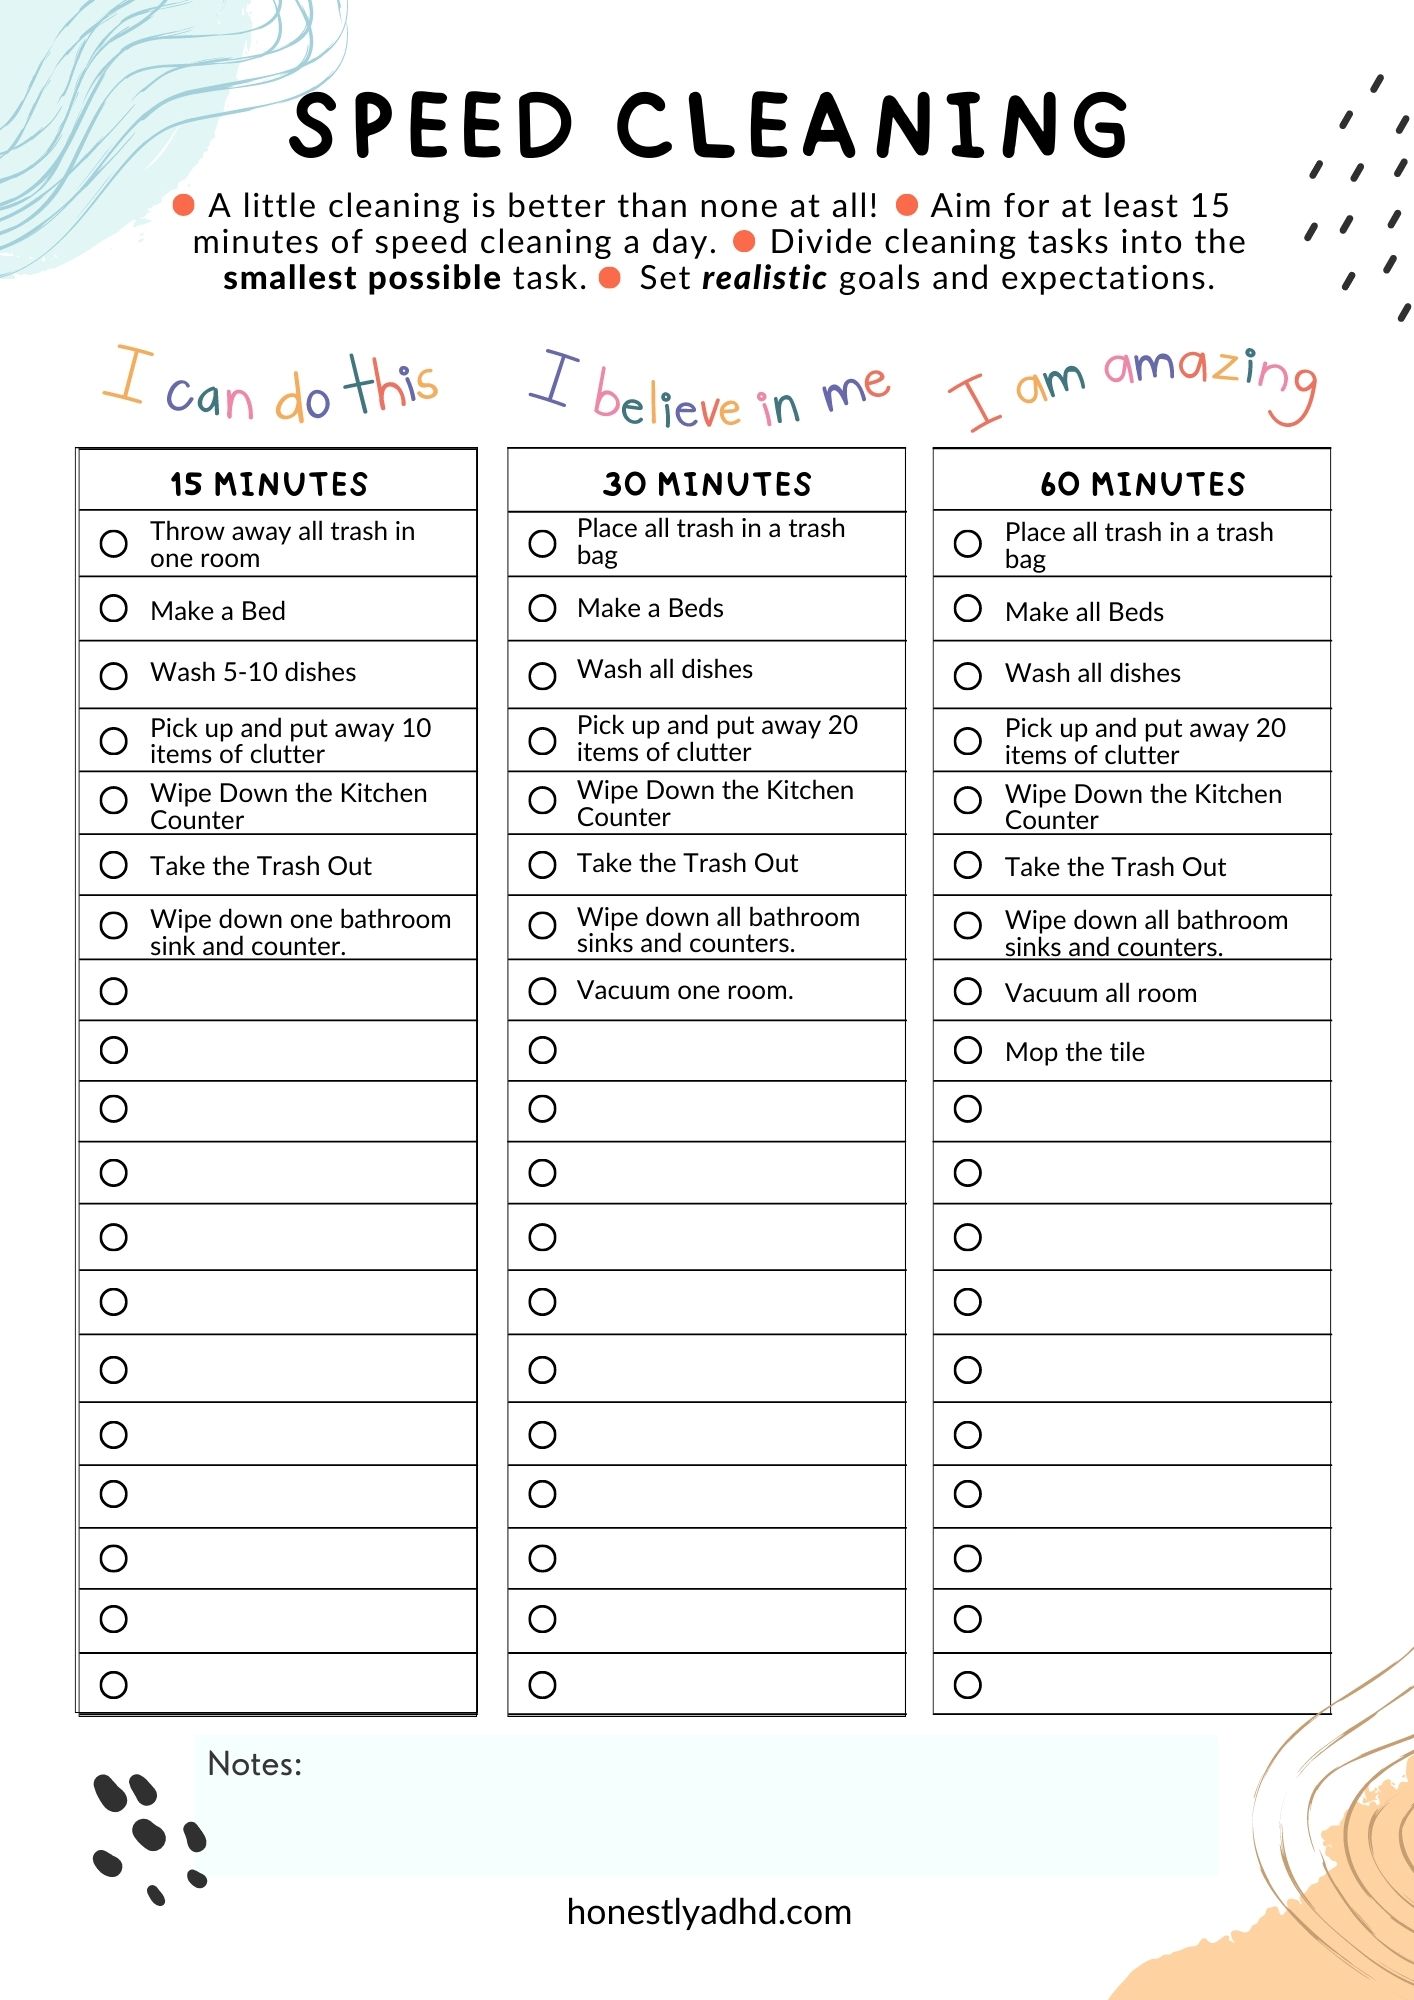 A printable speed cleaning checklist with tasks included.